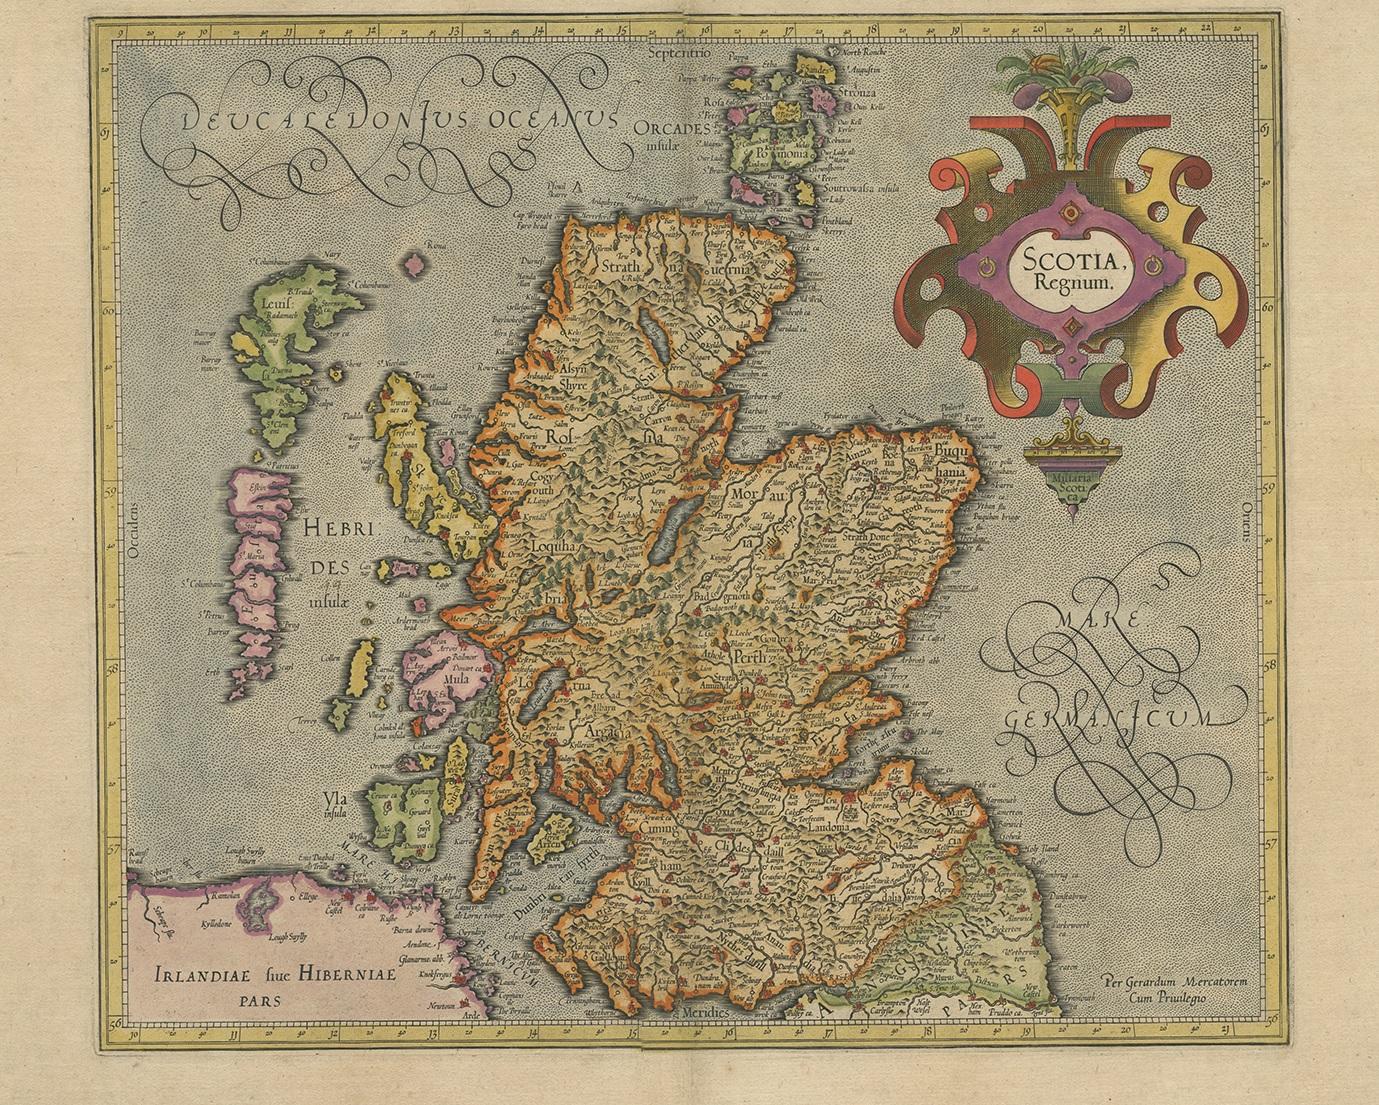 Antique map titled 'Scotia Regnum'. One of the earliest obtainable maps of Scotland. Published by G. Mercator, one of the most famous cartographers of all time.